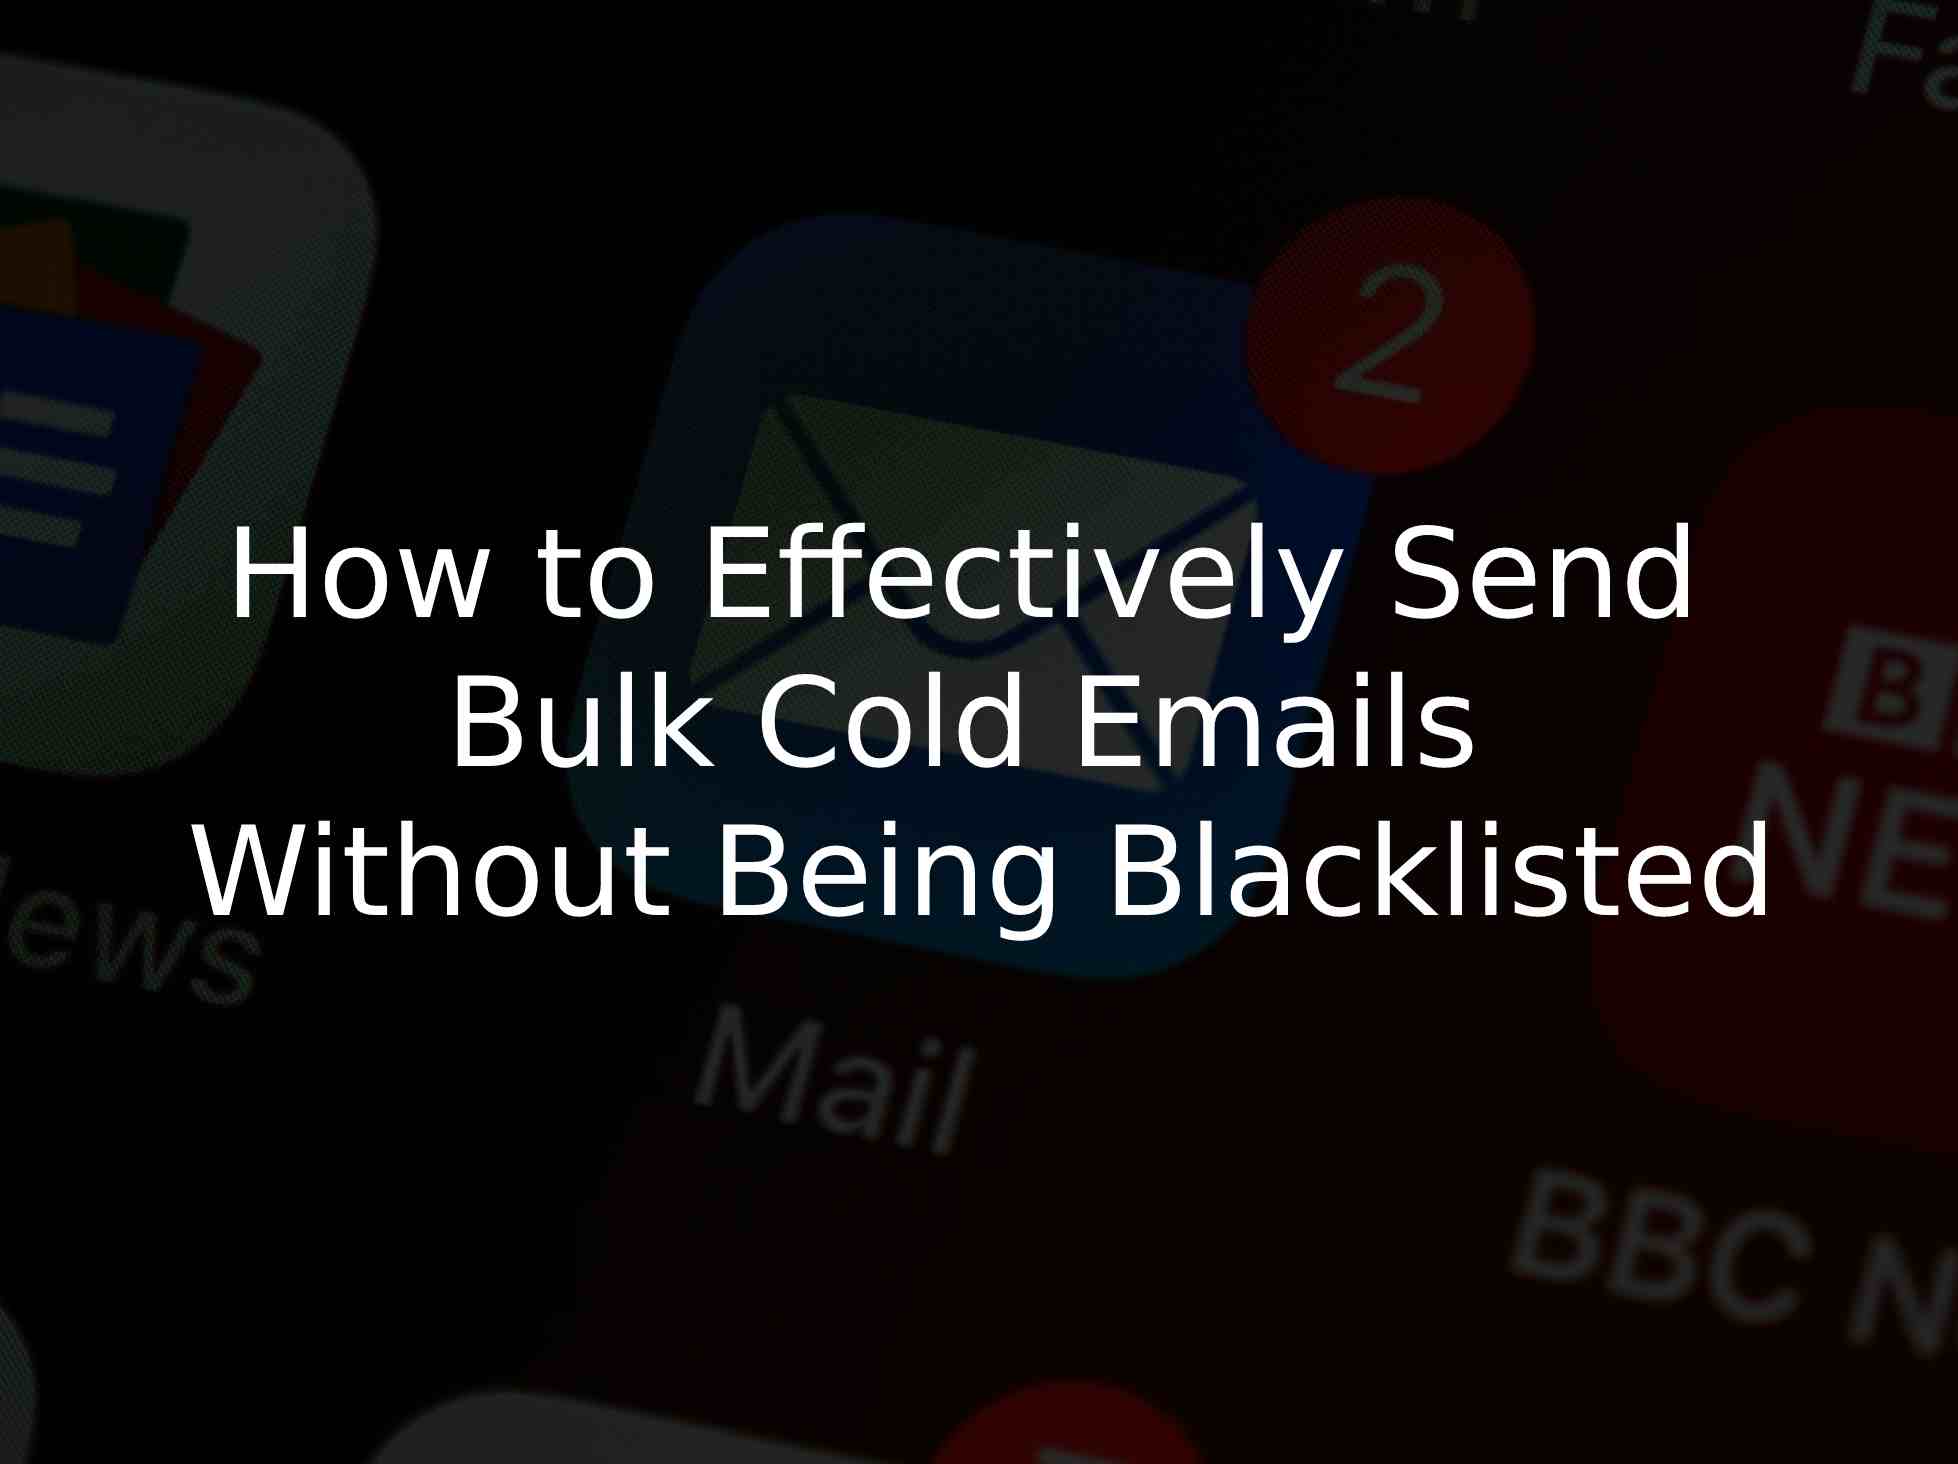 How to Effectively Send Bulk Cold Emails Without Being Blacklisted